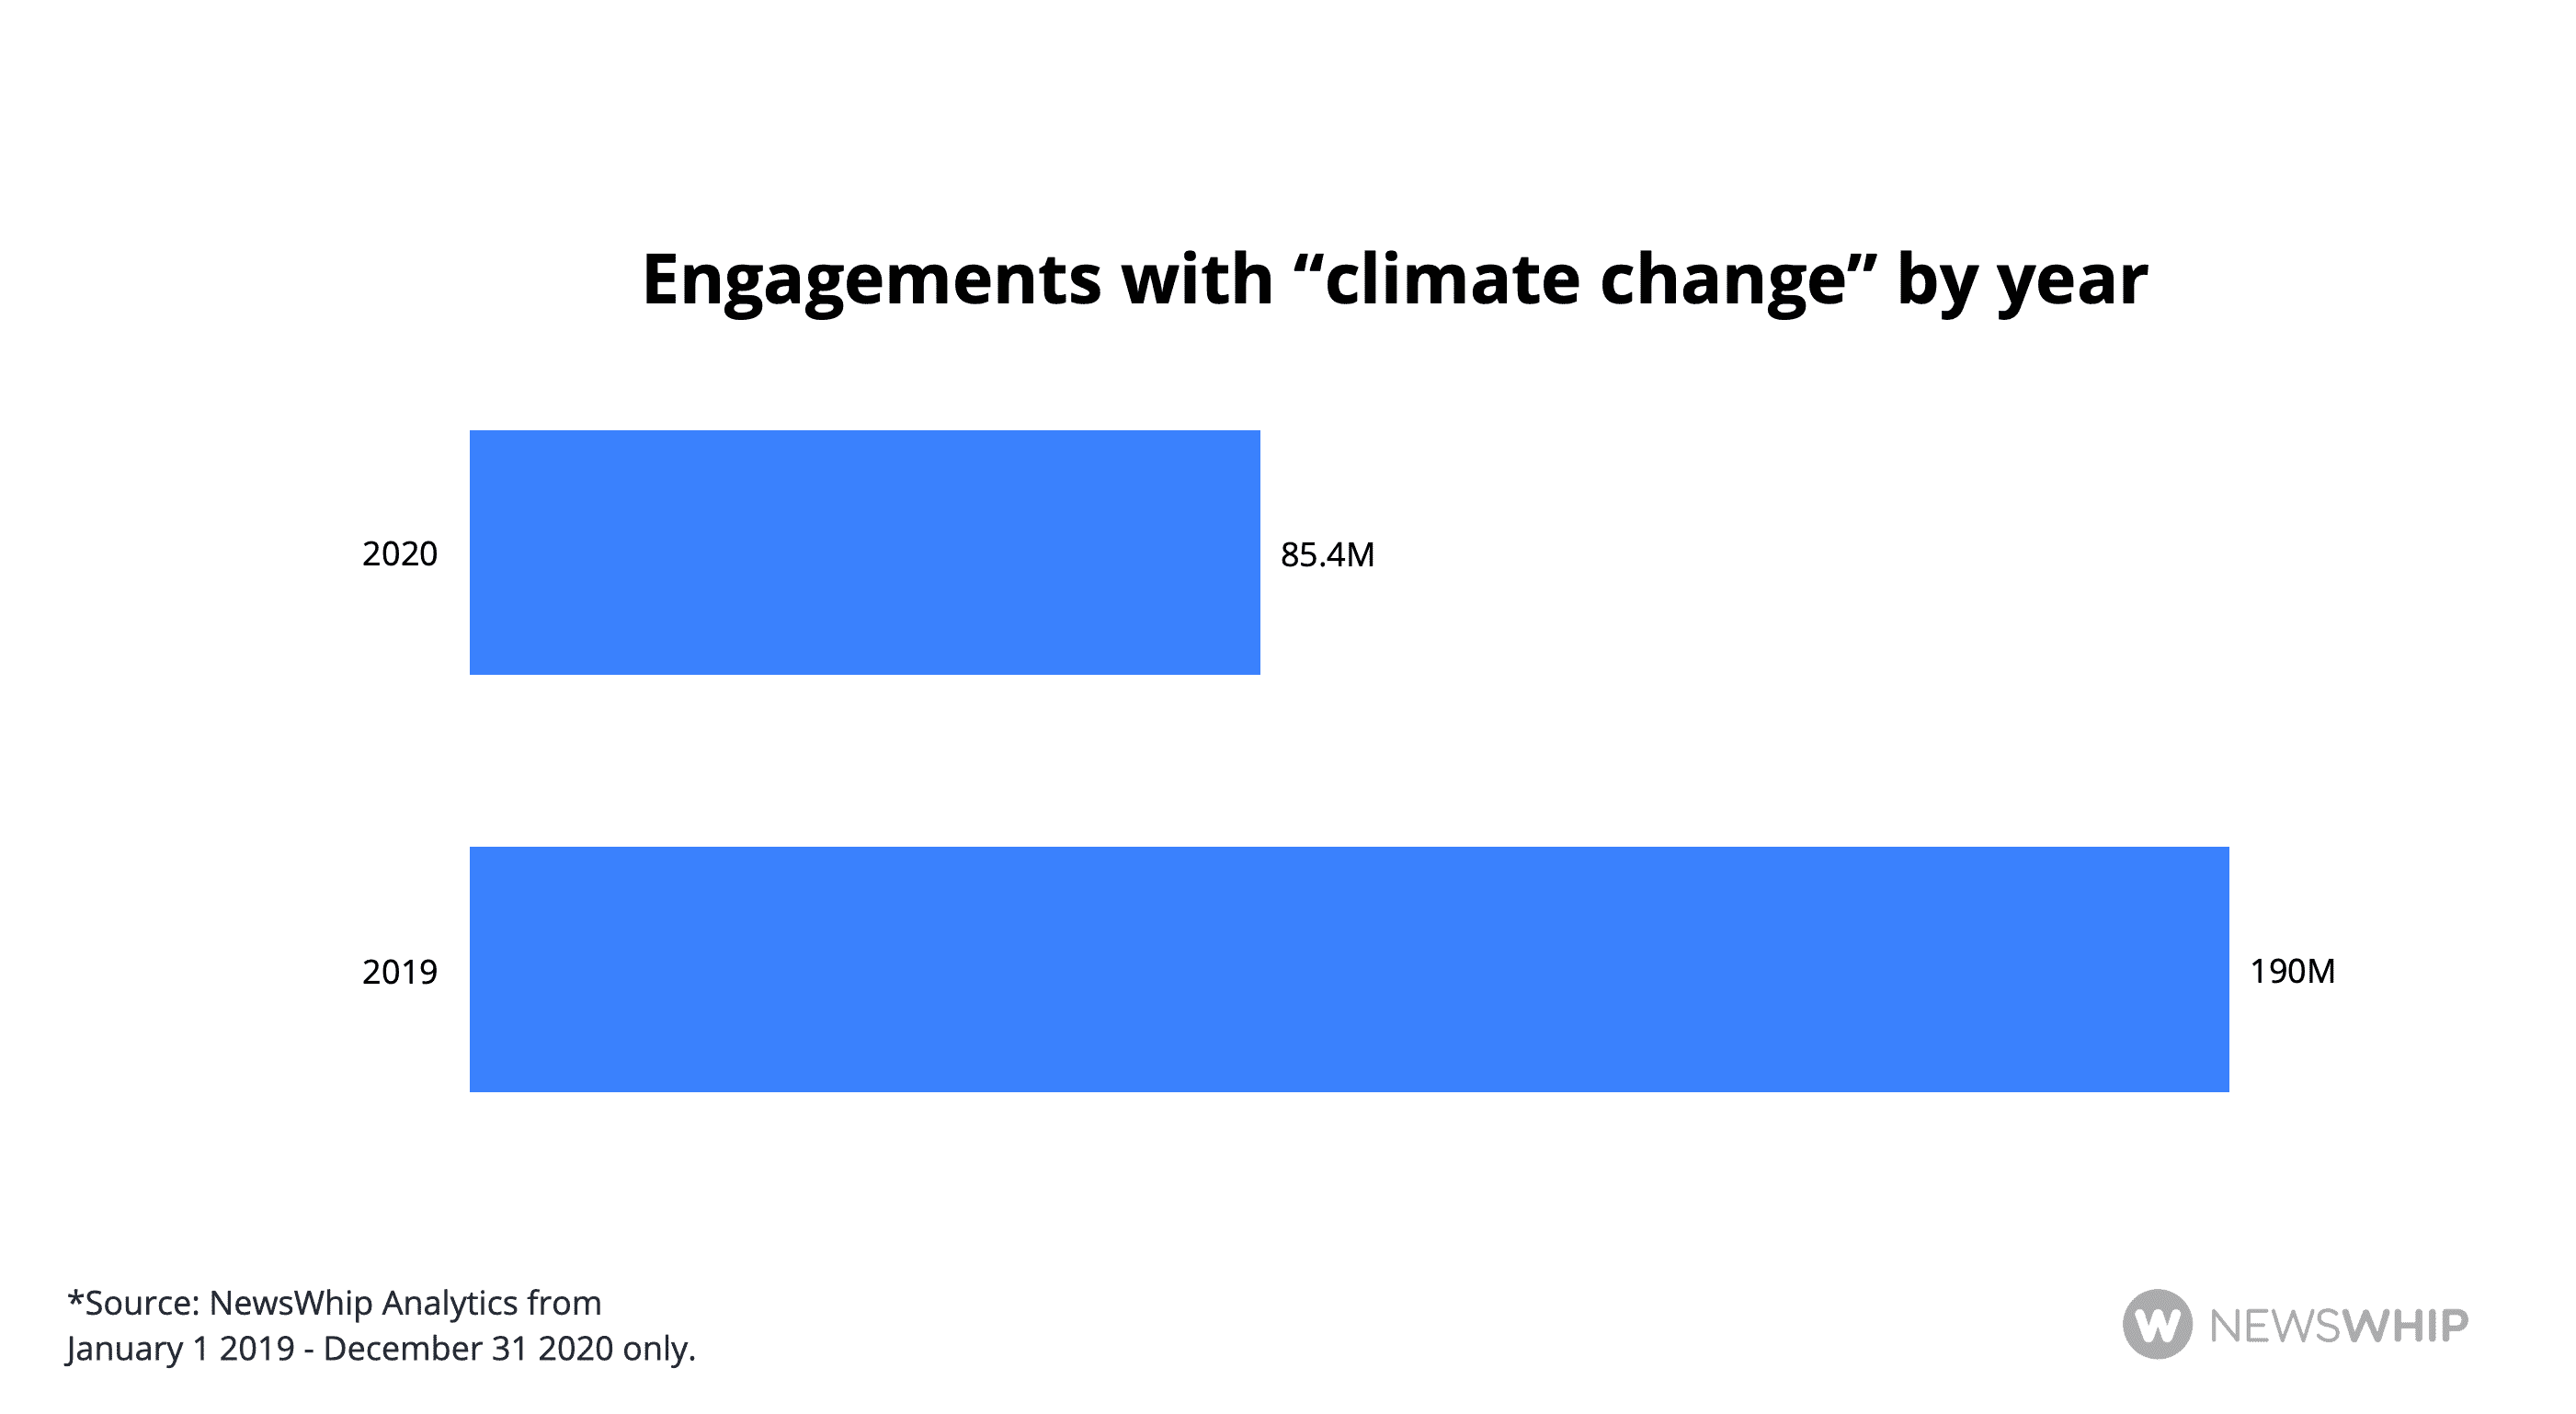 Chart showing engagement to climate change in 2020 vs 2019